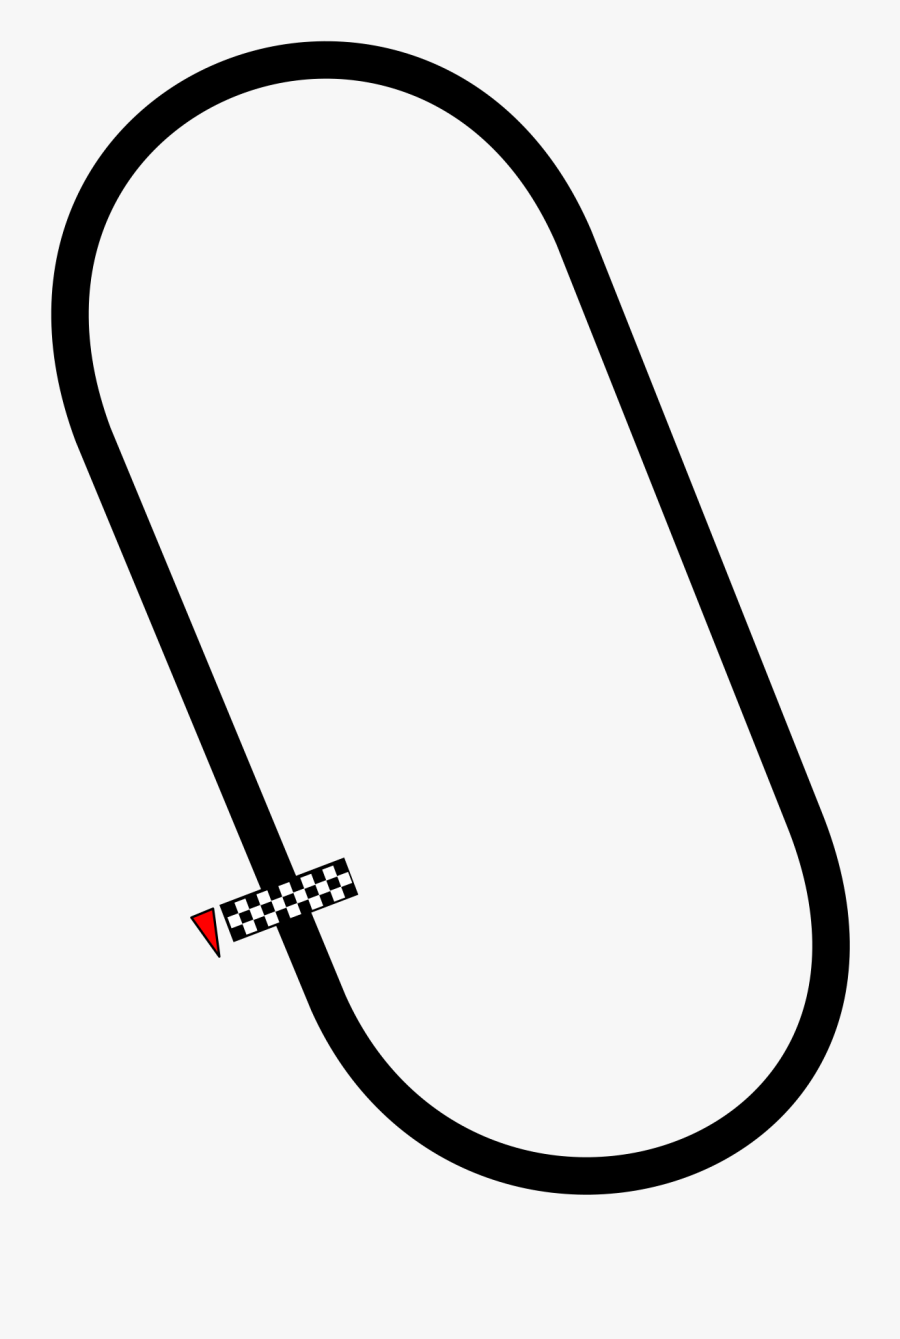 Freeuse Stock Oval Race Track Clipart, Transparent Clipart